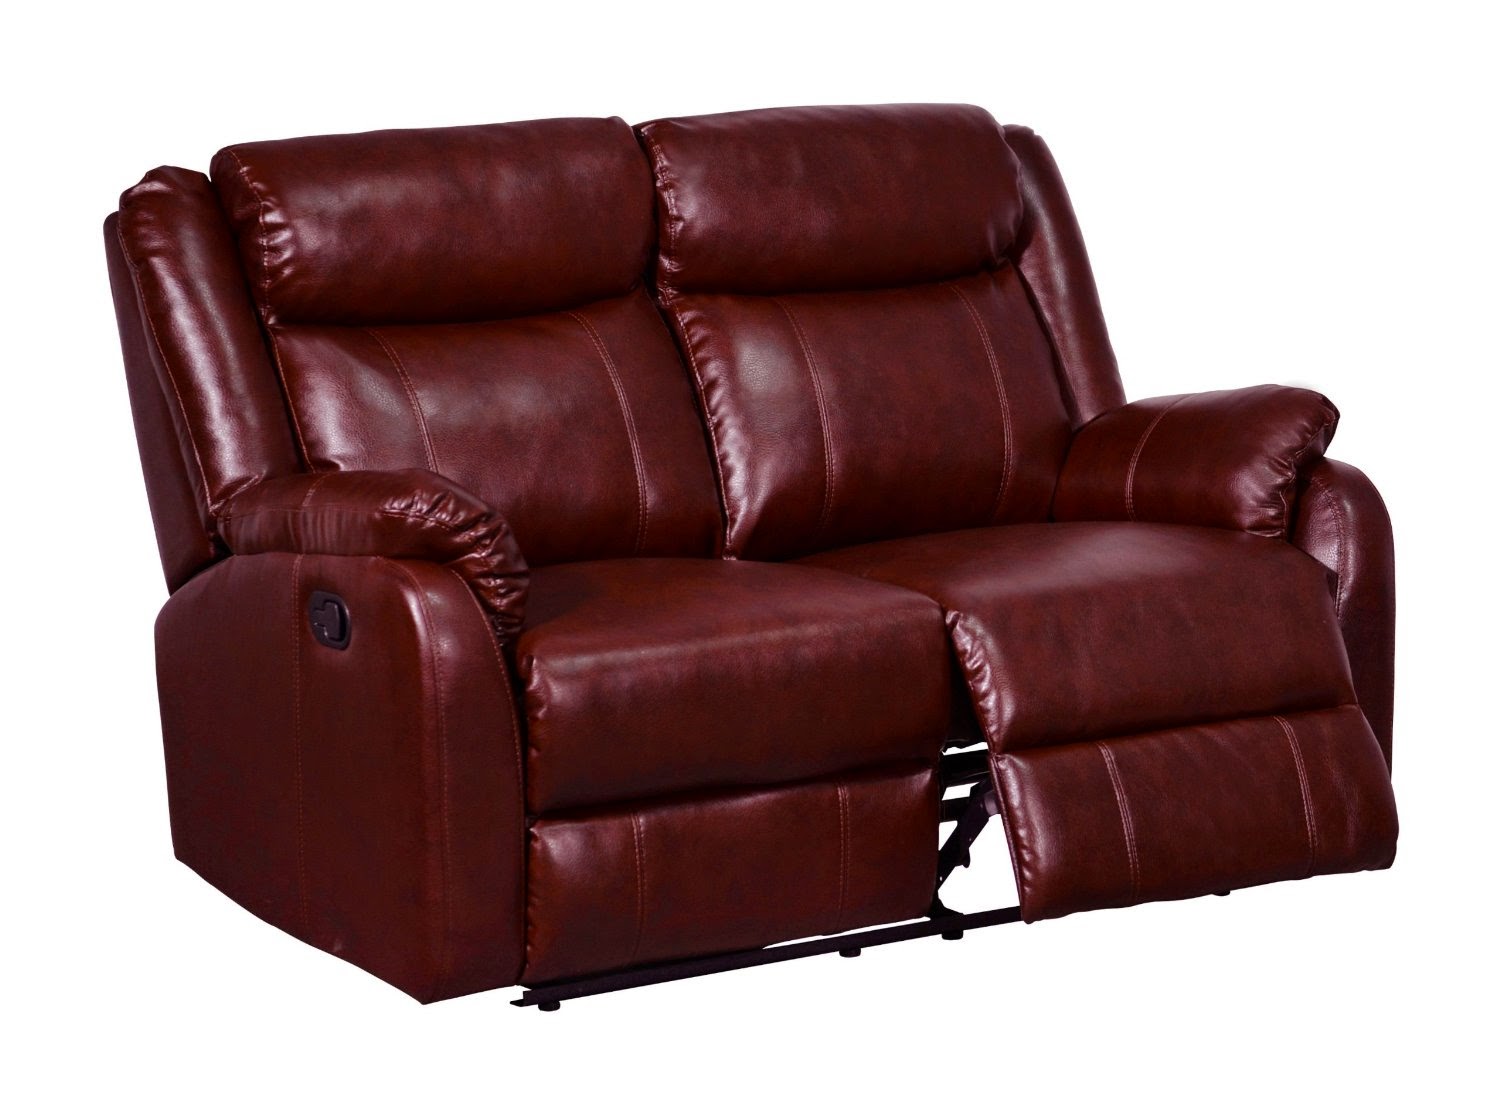 Reclining Sofa Loveseat And Chair Sets: Revolution Burgundy Leather